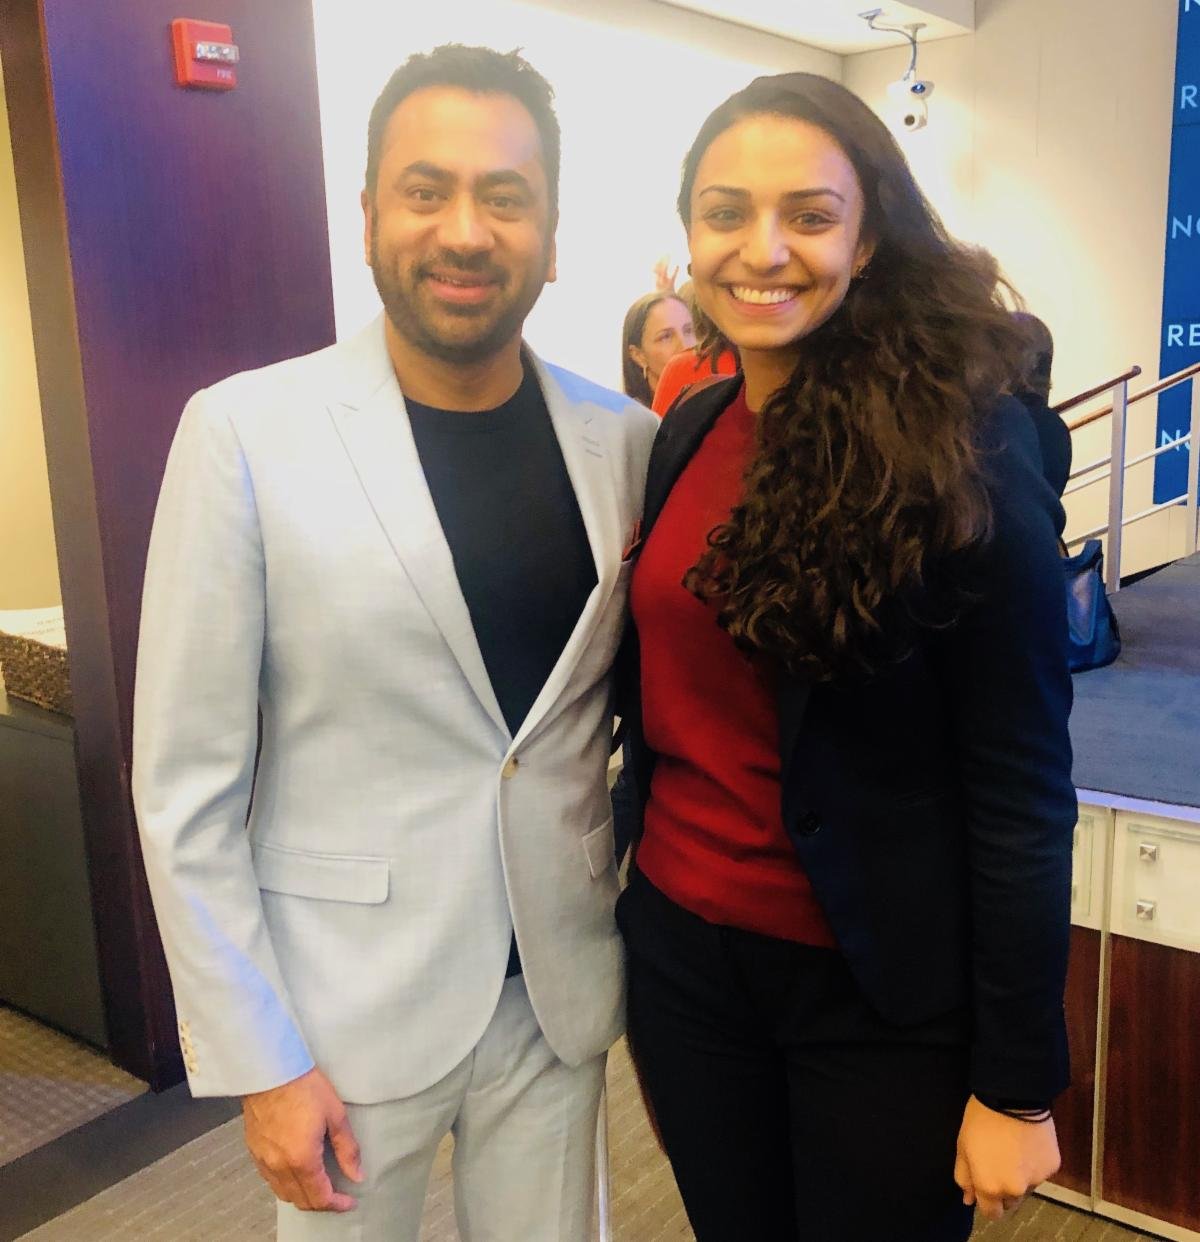 APF LC member Fatima Salman met actor Kal Penn at the Council on Foreign Relations.